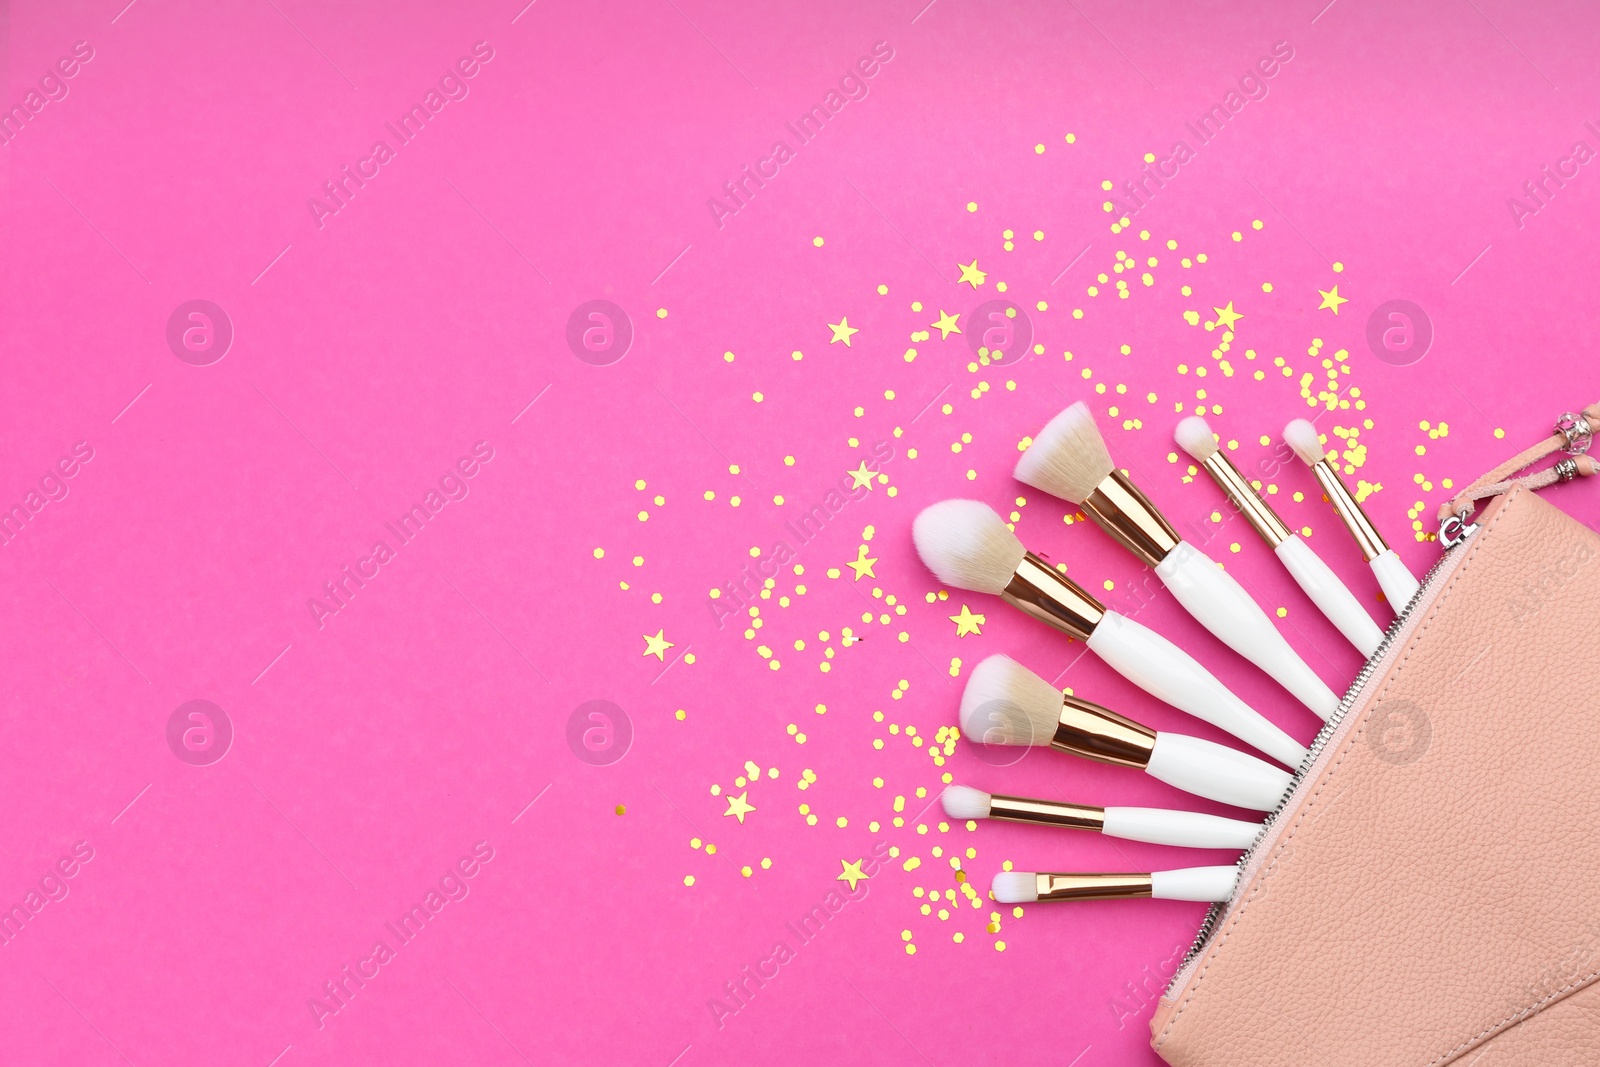 Photo of Different makeup brushes, case and shiny confetti on pink background, flat lay. Space for text